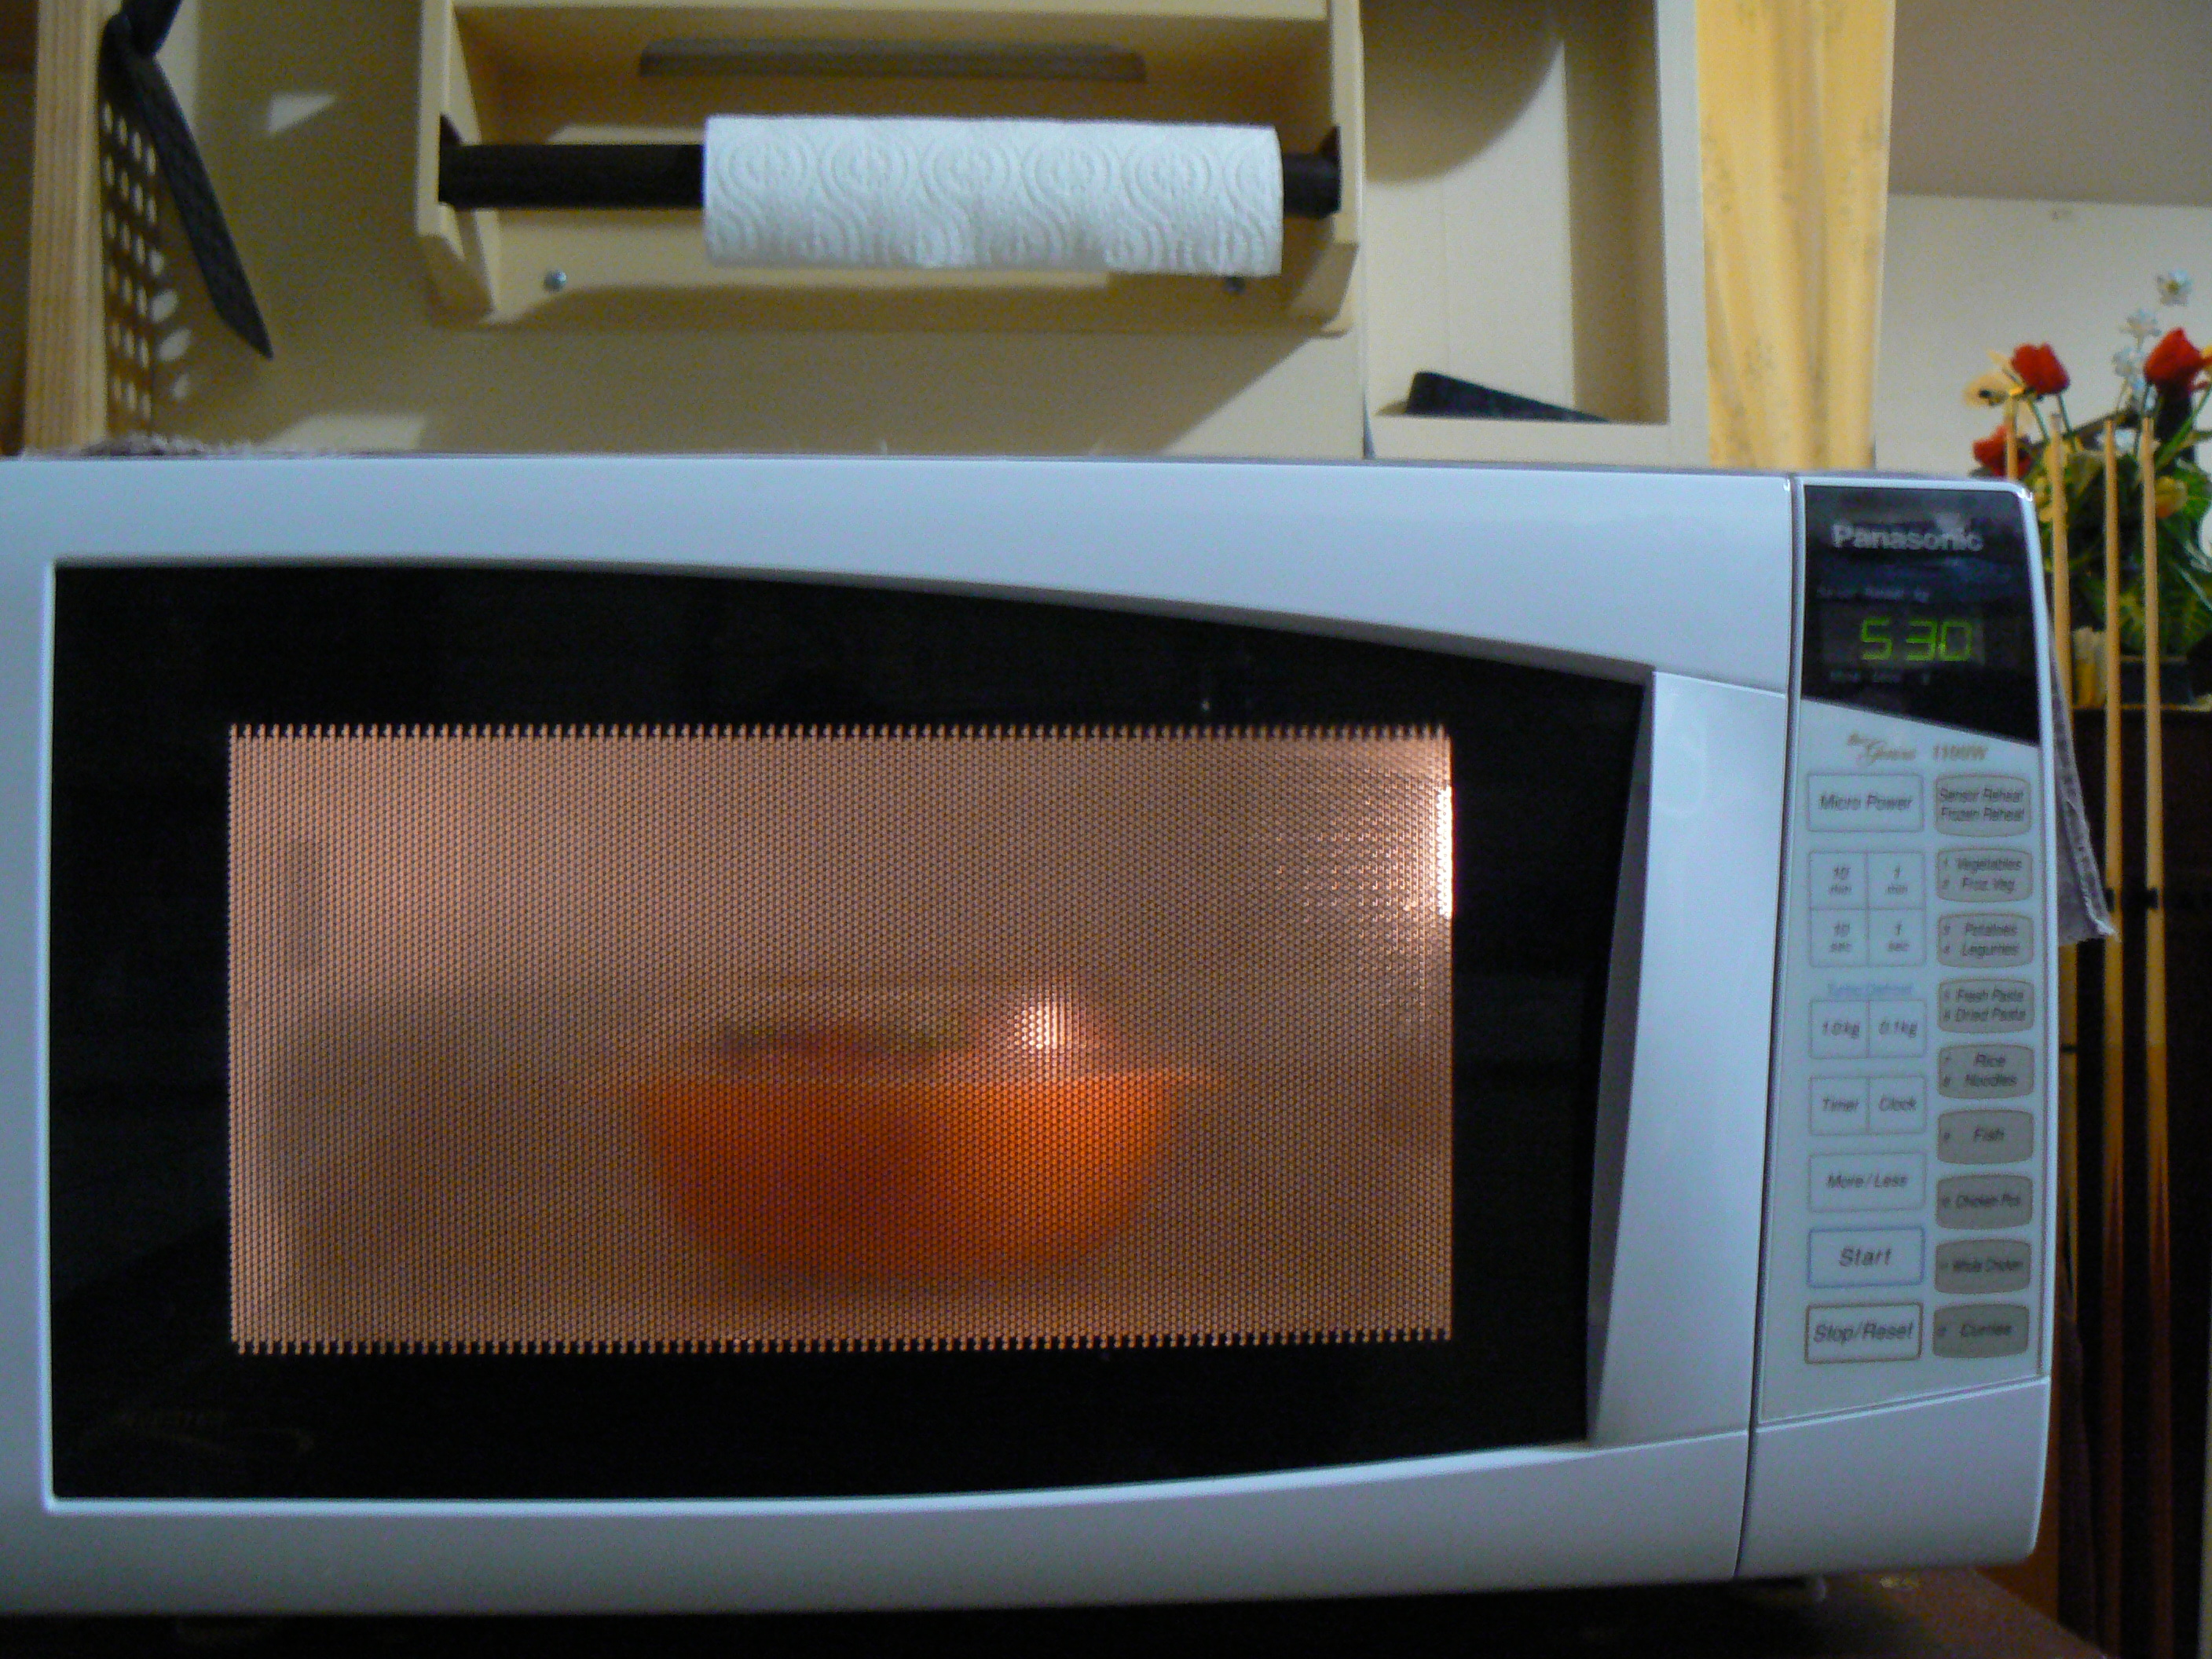 Even the microwave is busy during Earth Hour.